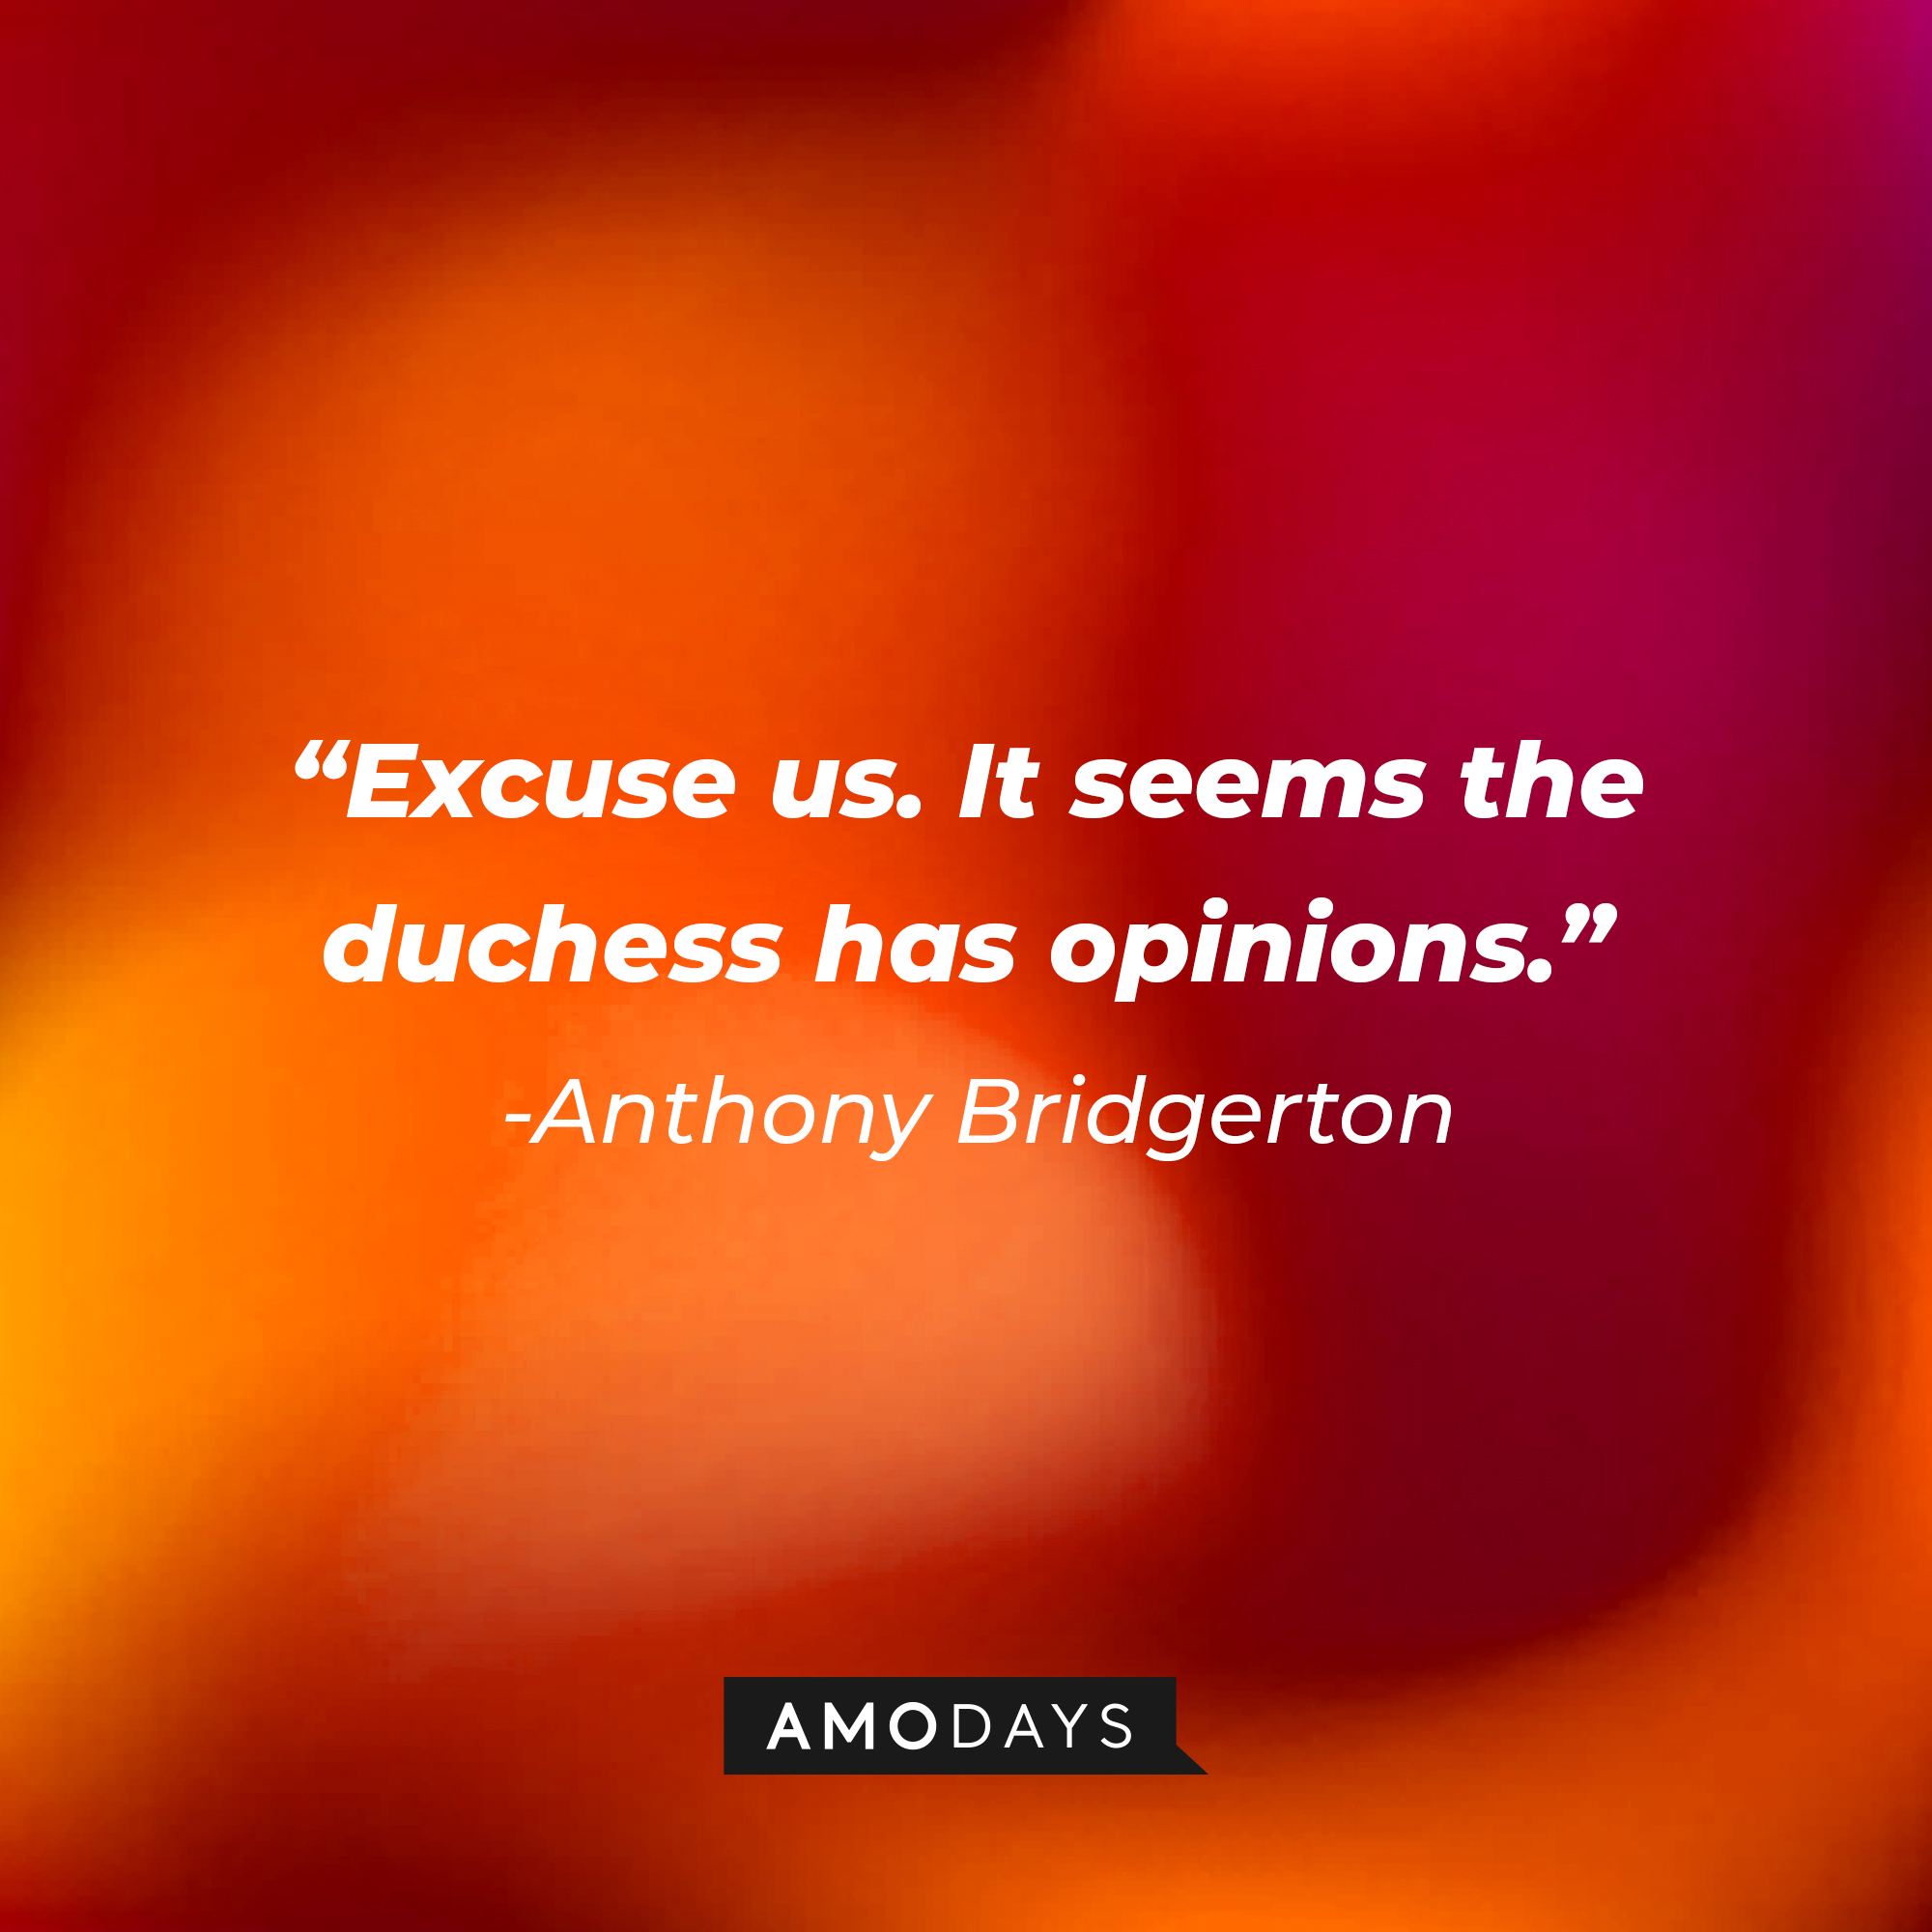 Anthony Bridgerton's quote: "Excuse us. It seems the duchess has opinions." | Source: AmoDays